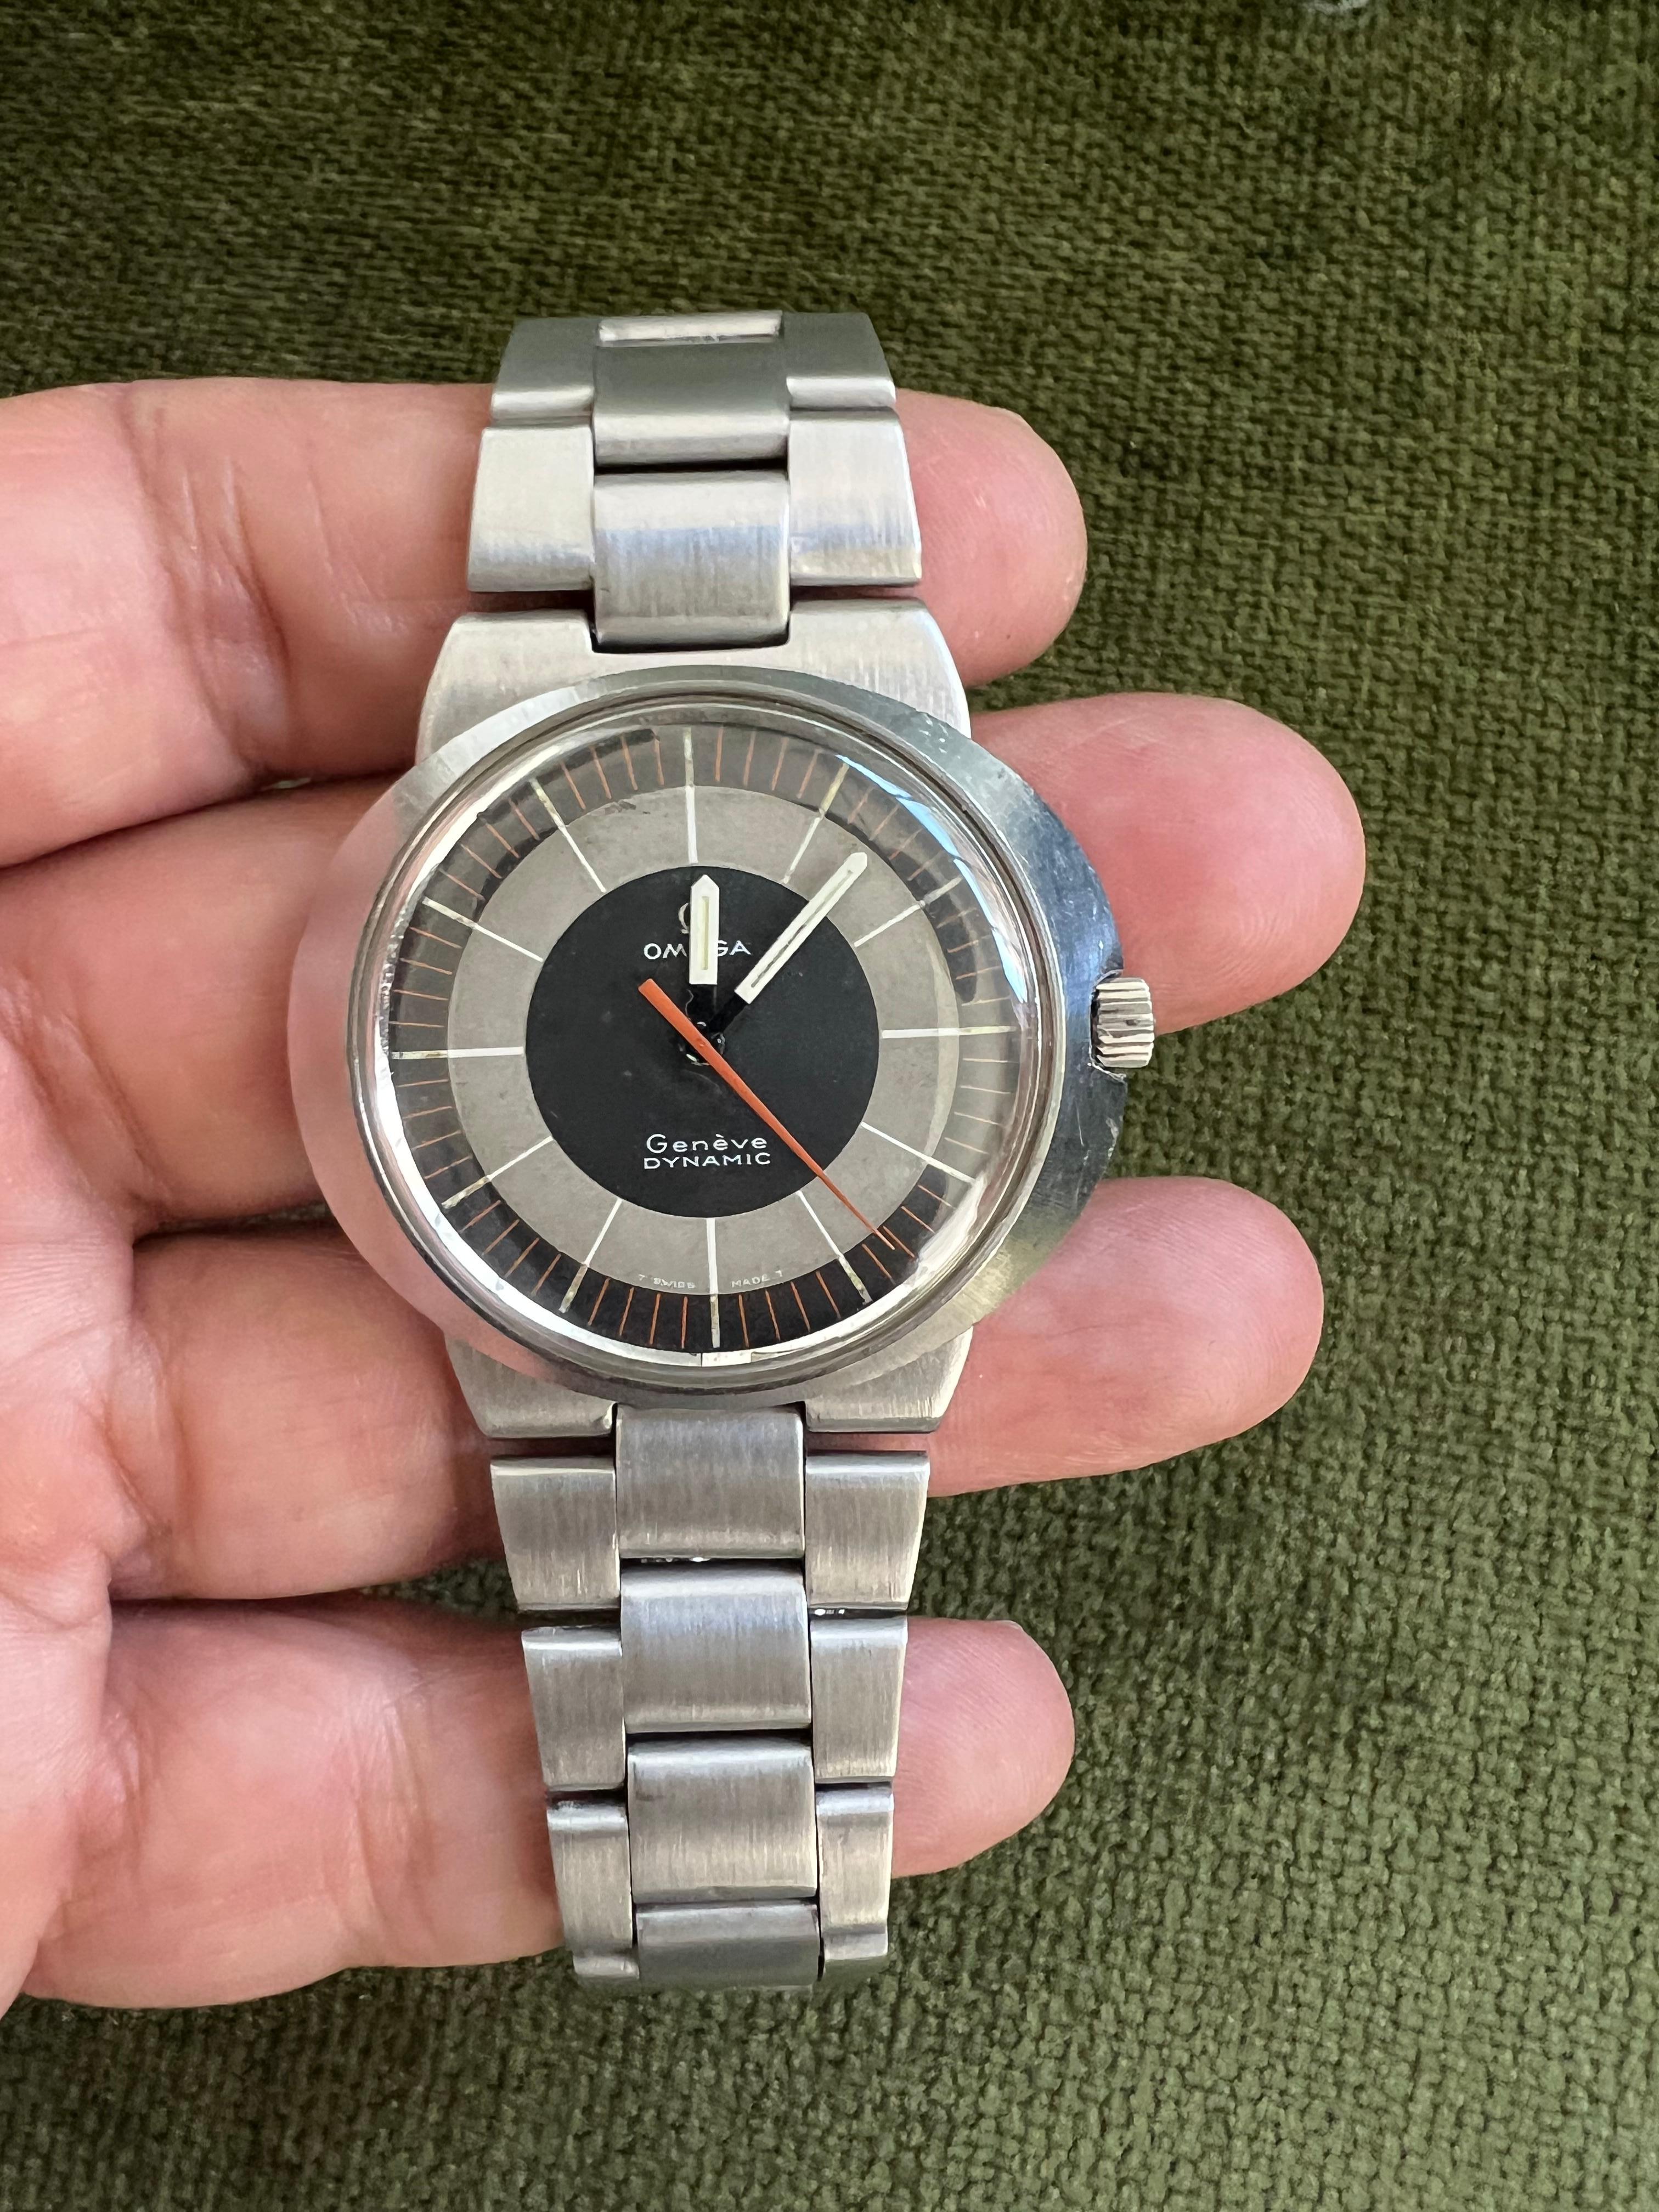 Omega Dynamic Vintage c. 1970s Watch W/ Tricolored Dial 2